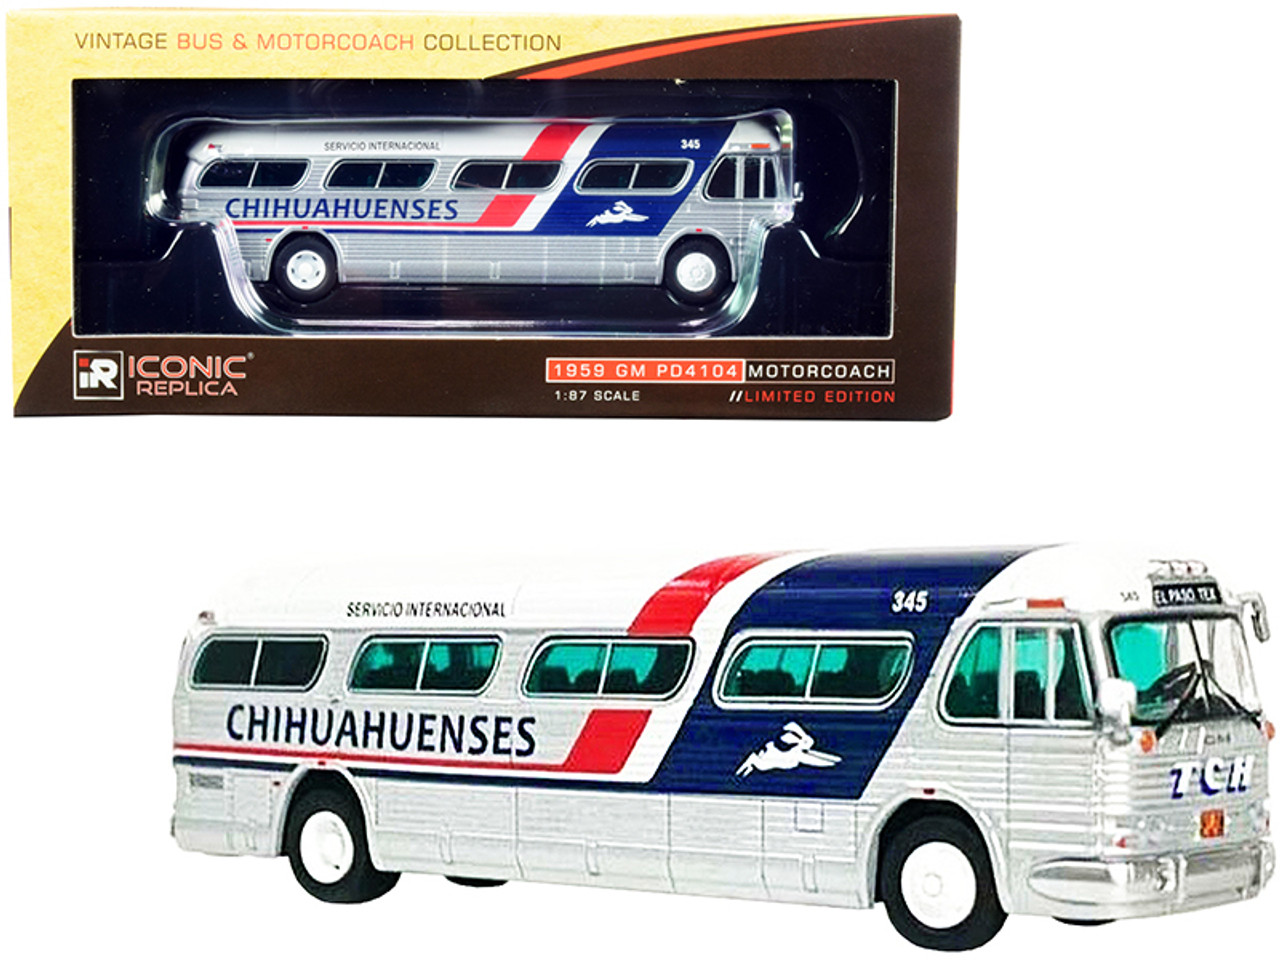 1959 GM PD4104 Motorcoach Bus "El Paso" Texas "Chihuahuenses" Silver and White with Red and Blue Stripes "Vintage Bus & Motorcoach Collection" 1/87 (HO) Diecast Model by Iconic Replicas